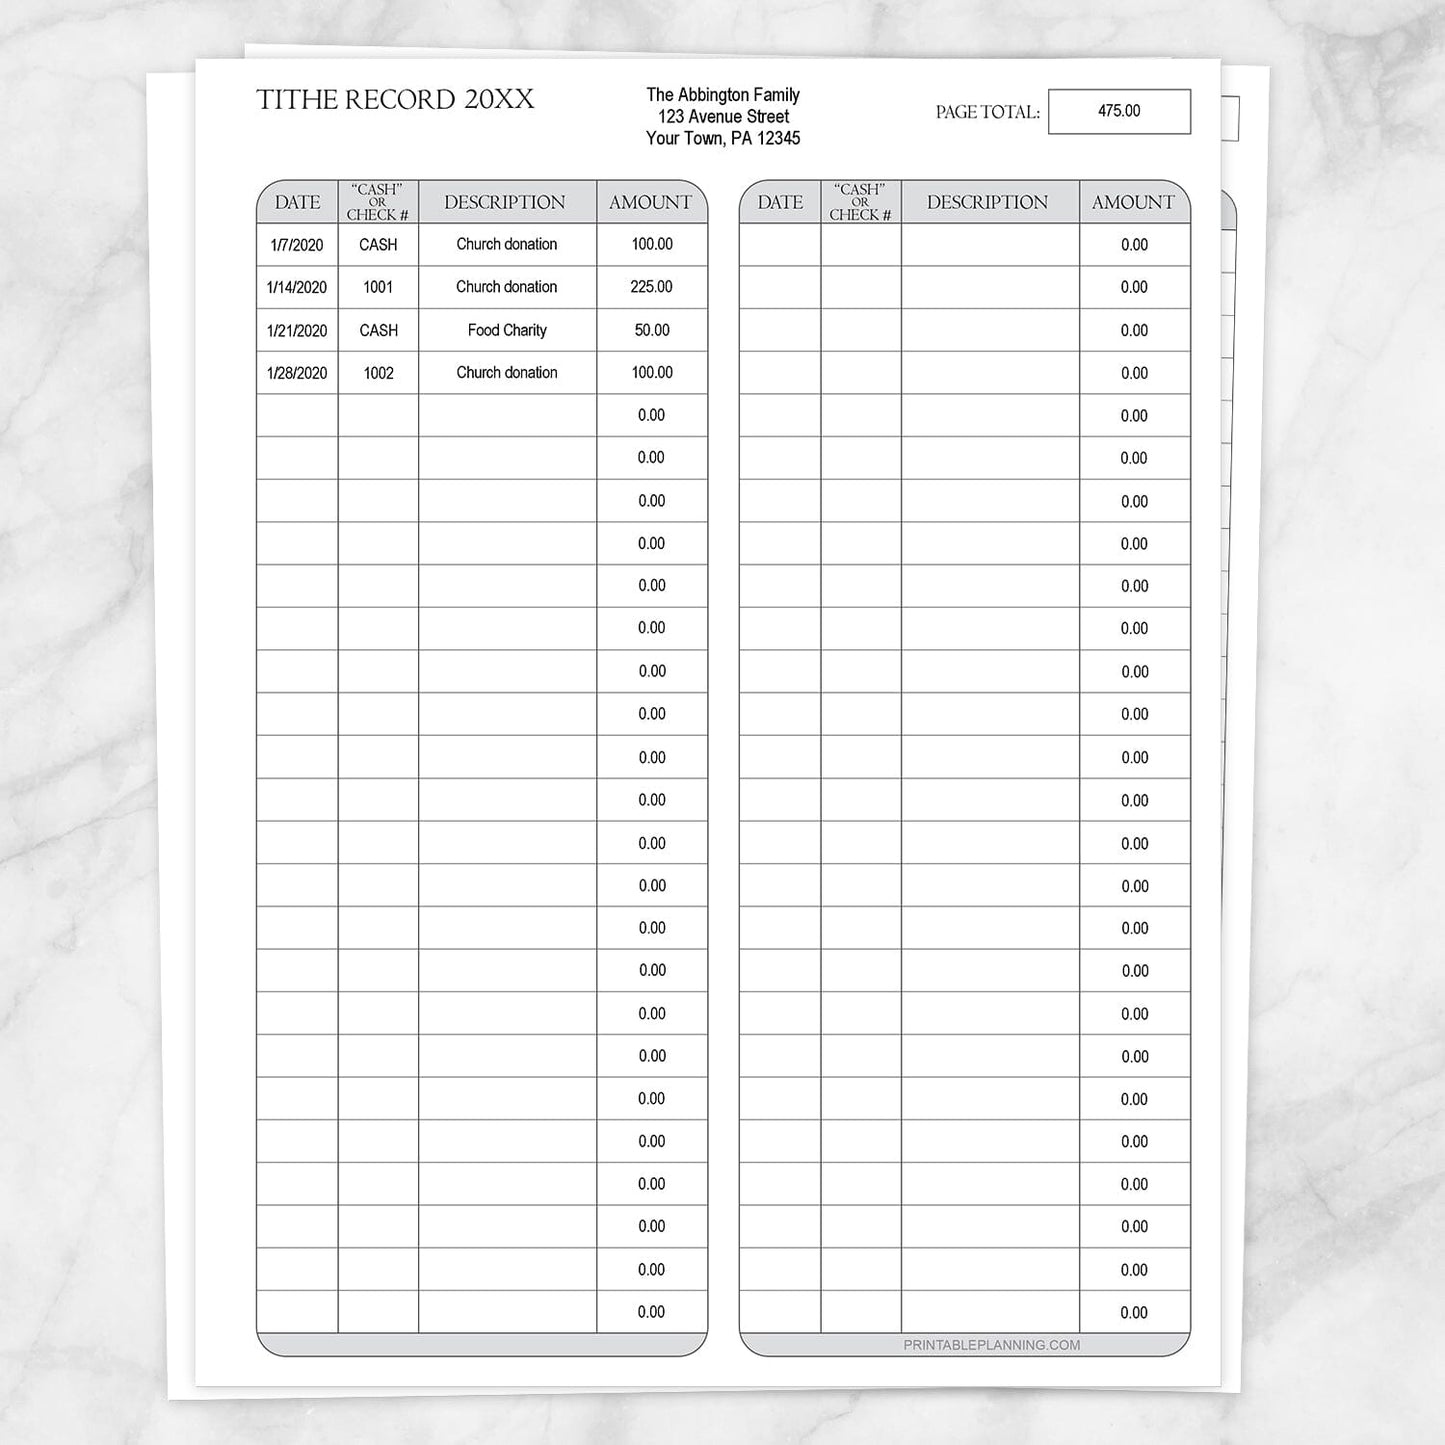 Printable Tithe Record with Auto-Calculating Total at Printable Planning